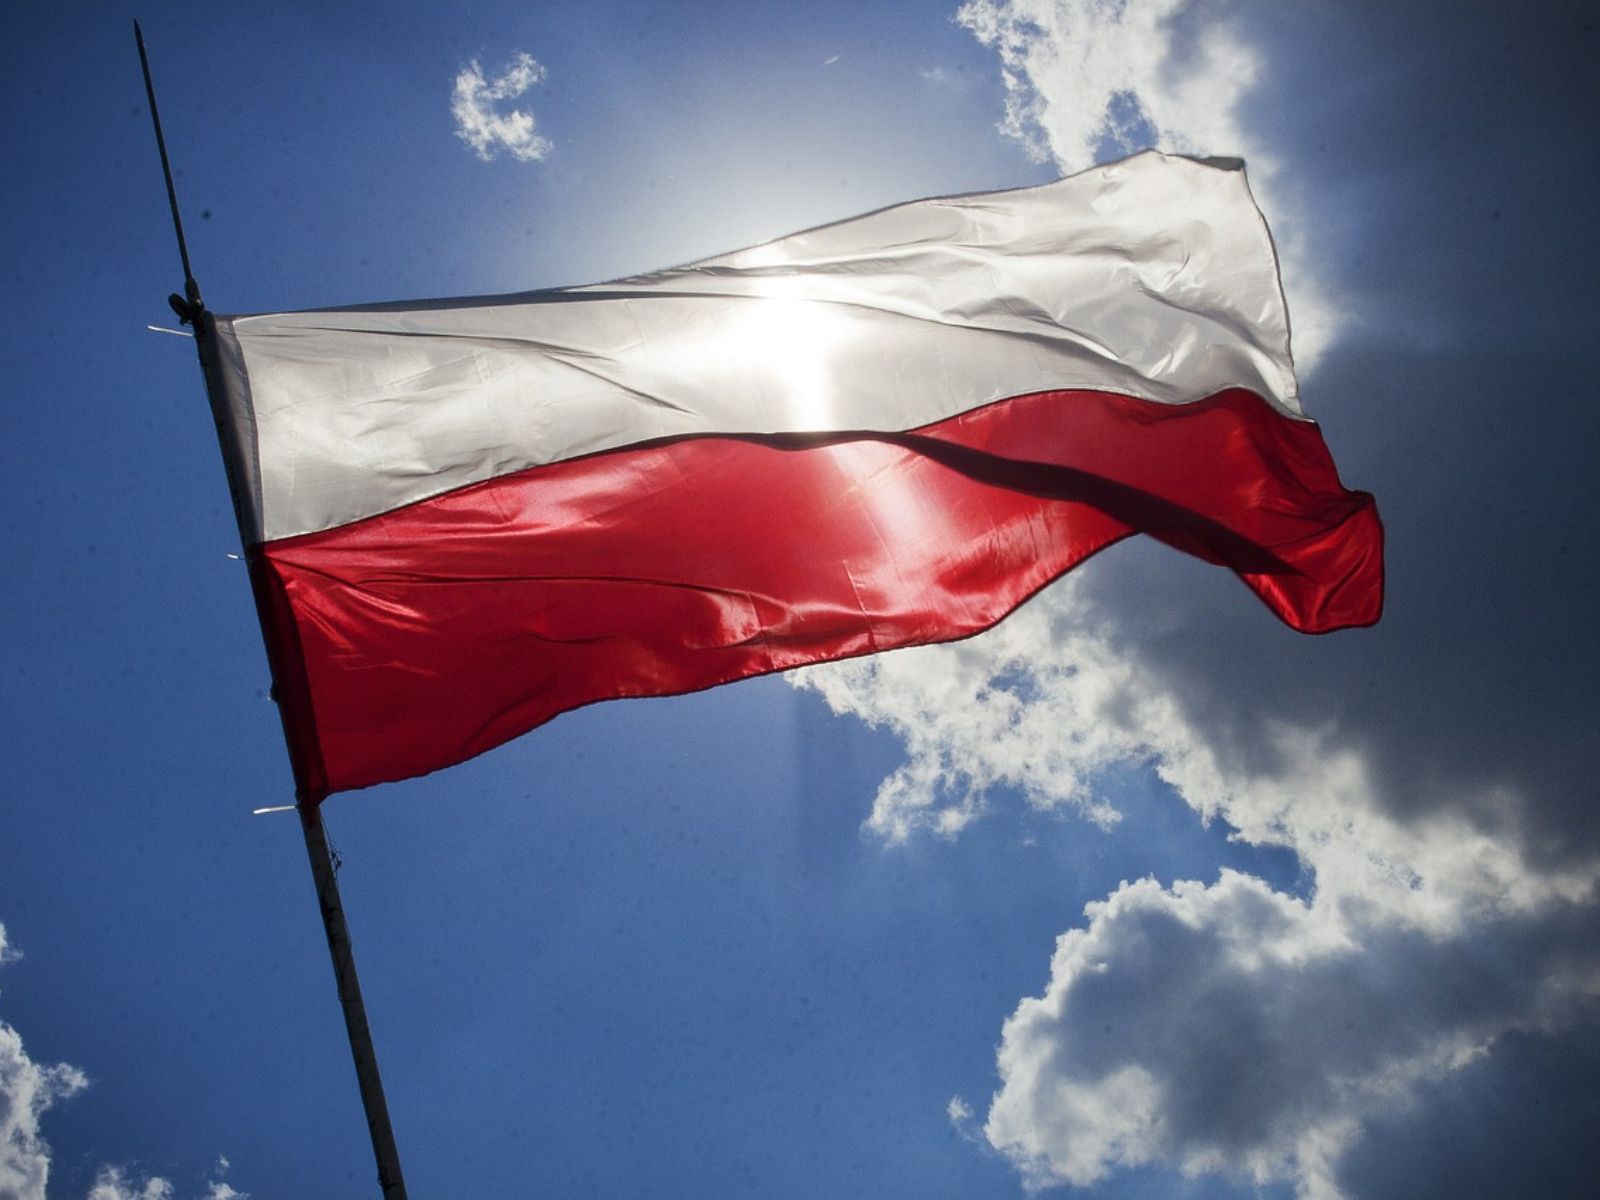 How Big Is Poland’s Medical Cannabis Industry?